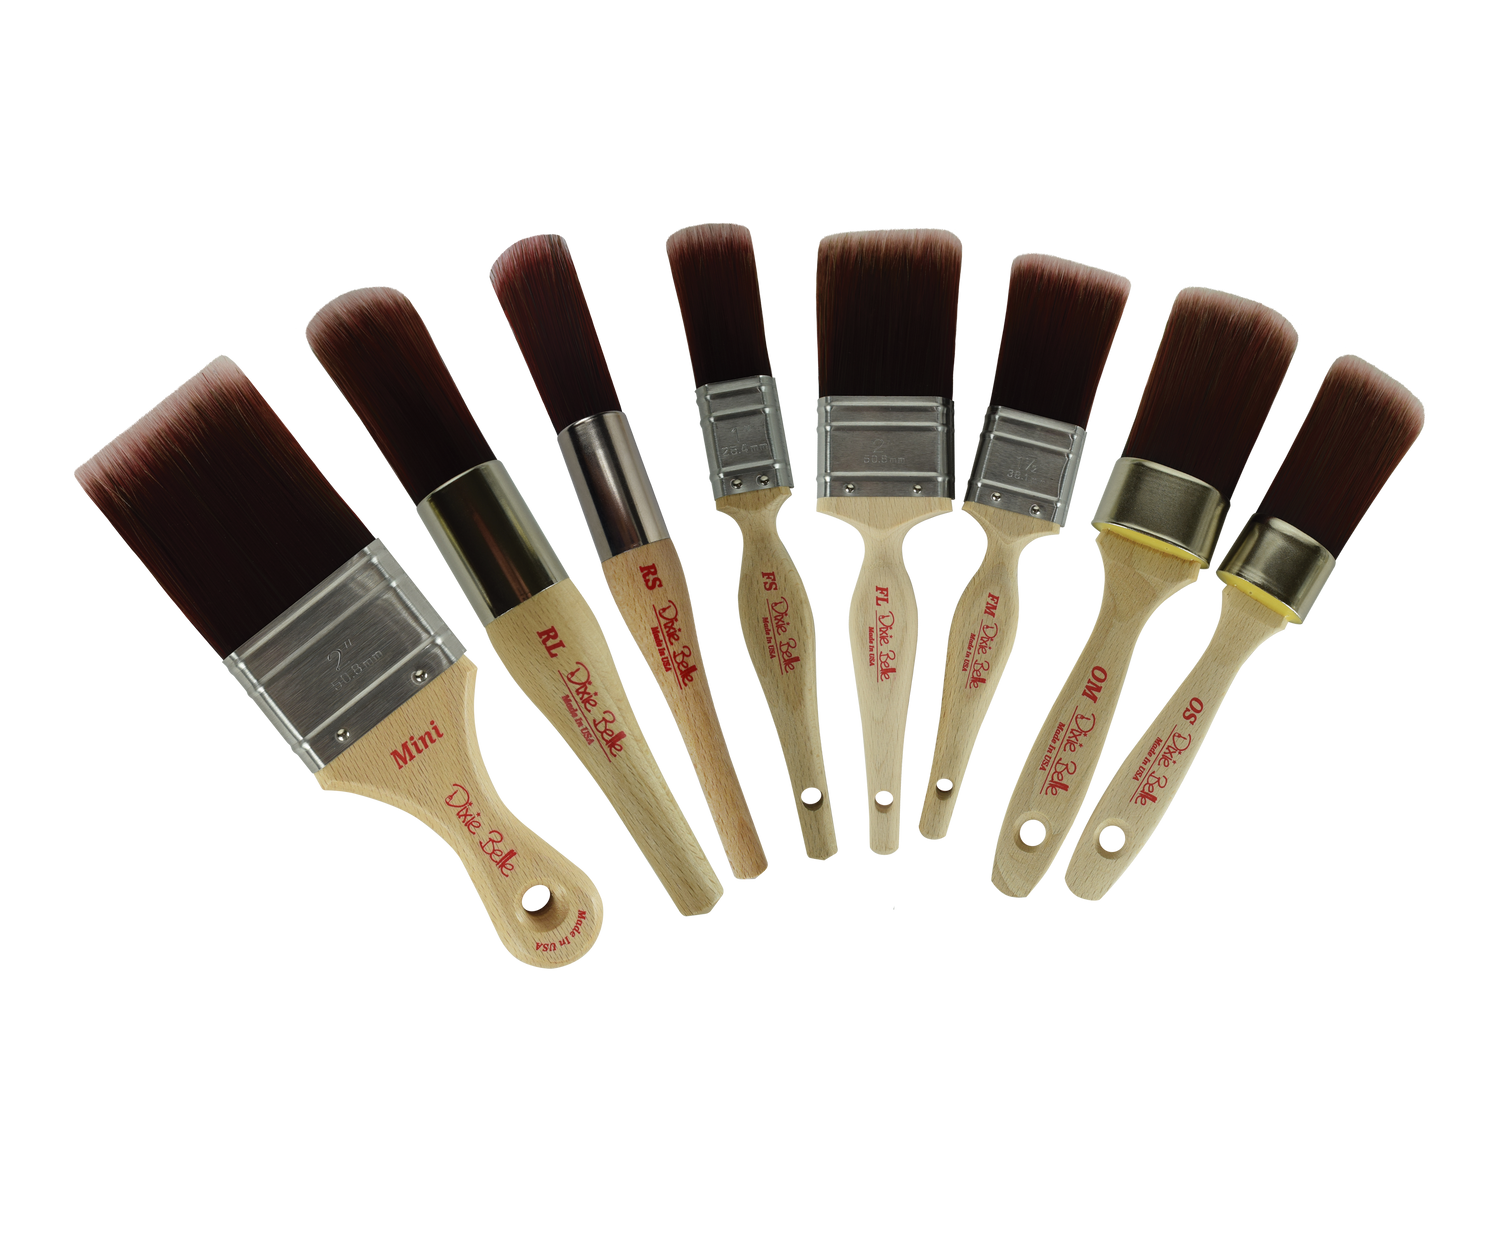 Synthetic fiber brushes